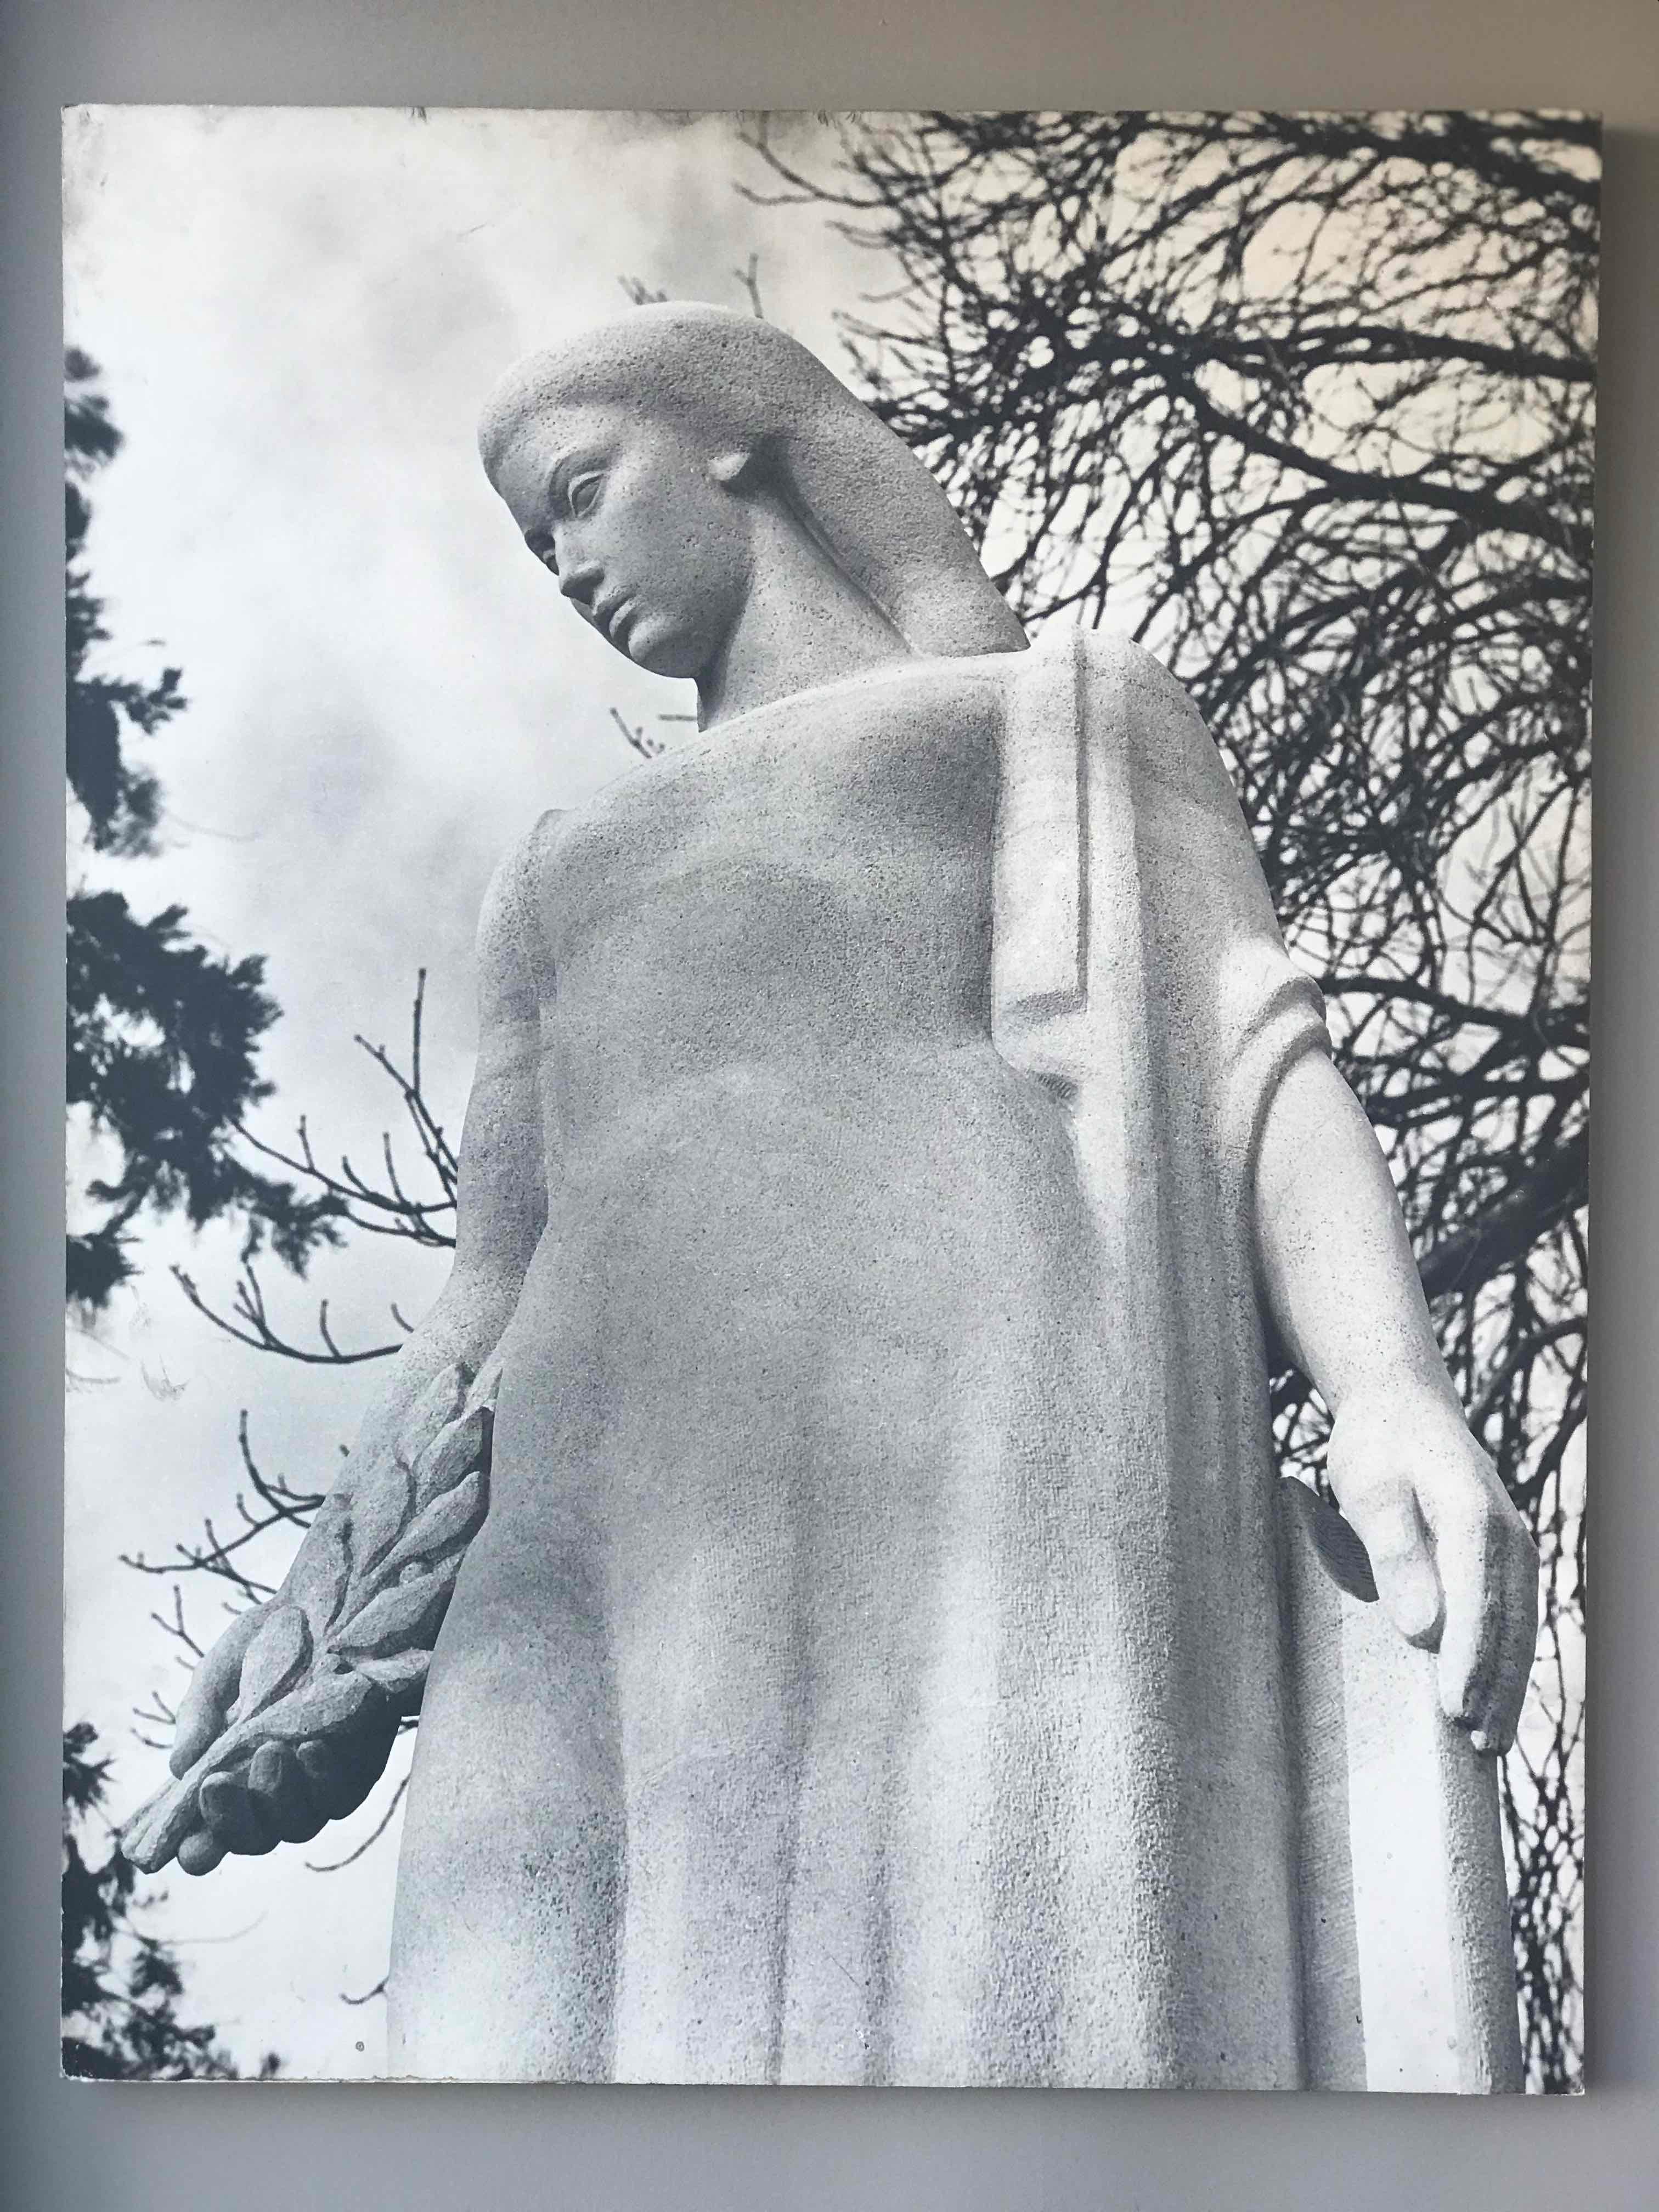 Large black and white photograph of female sculpture.